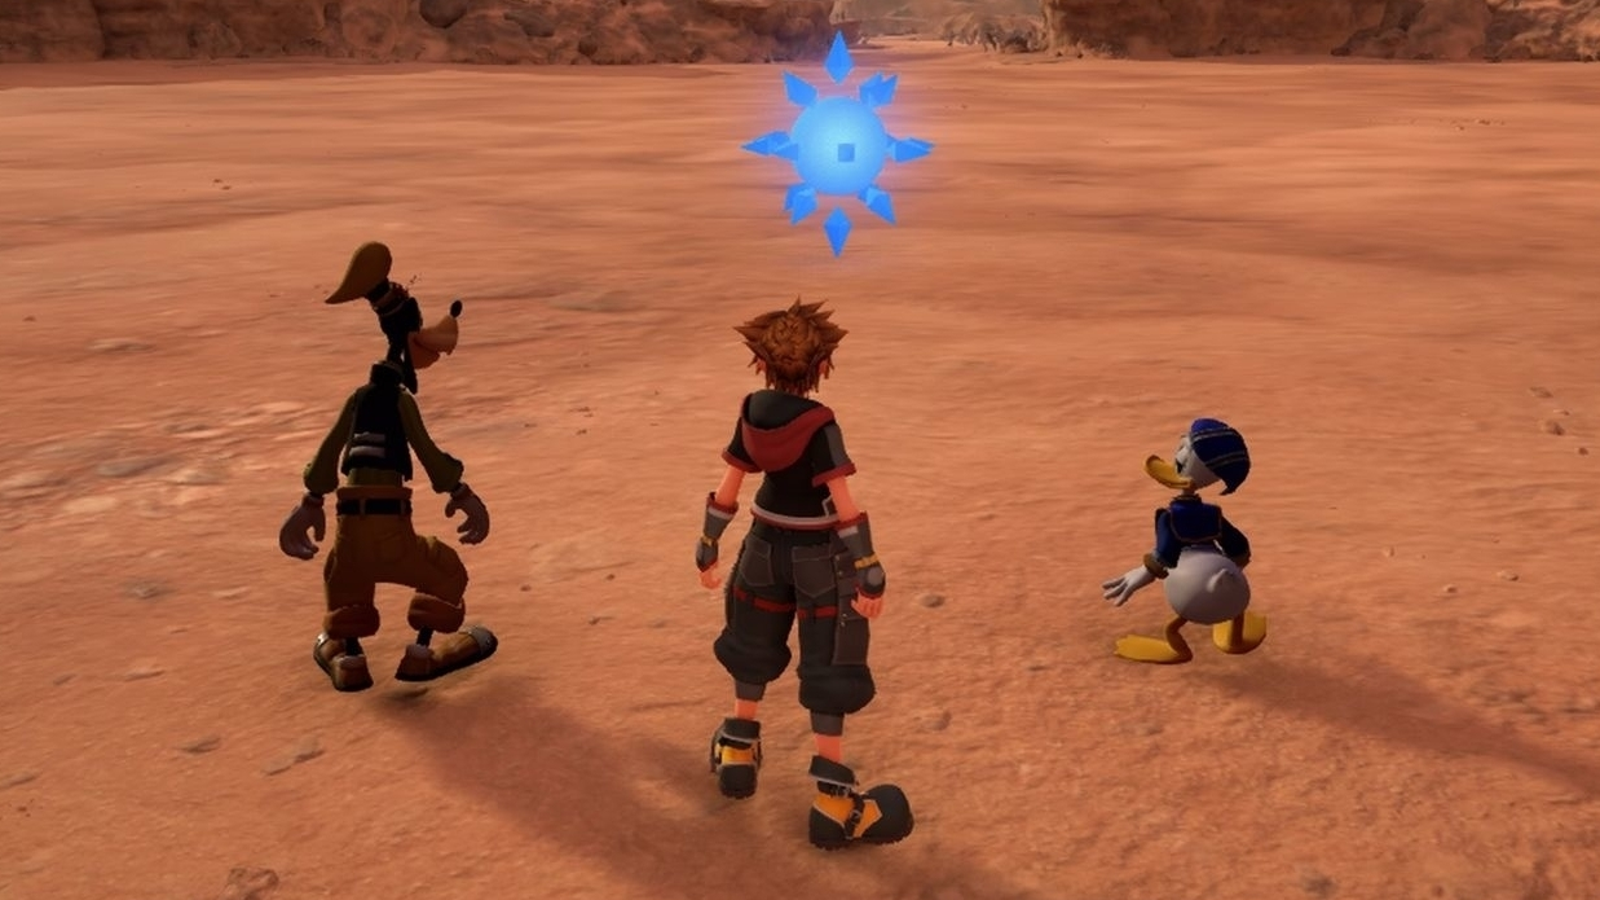 Missing-Link just keeps looking better and better with every update news.  Lots of cool things in this game to look forward to. : r/KingdomHearts